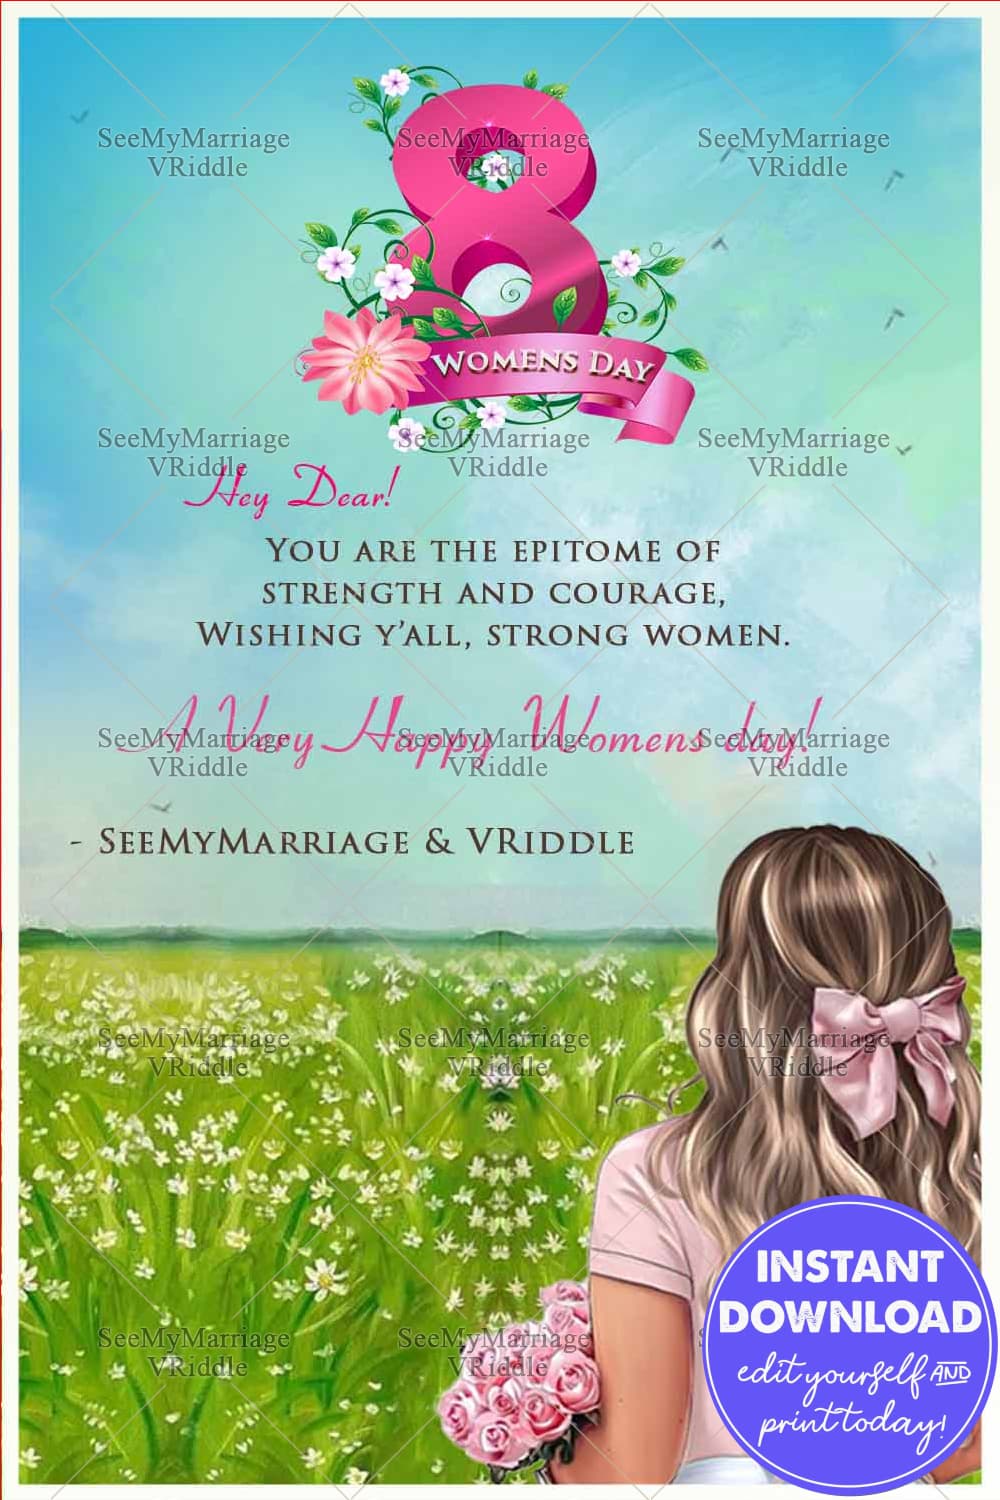 Women's Day Greeting Card with a Girl Holding a Flower, Surrounded by Green Grass, and a Light Green Background